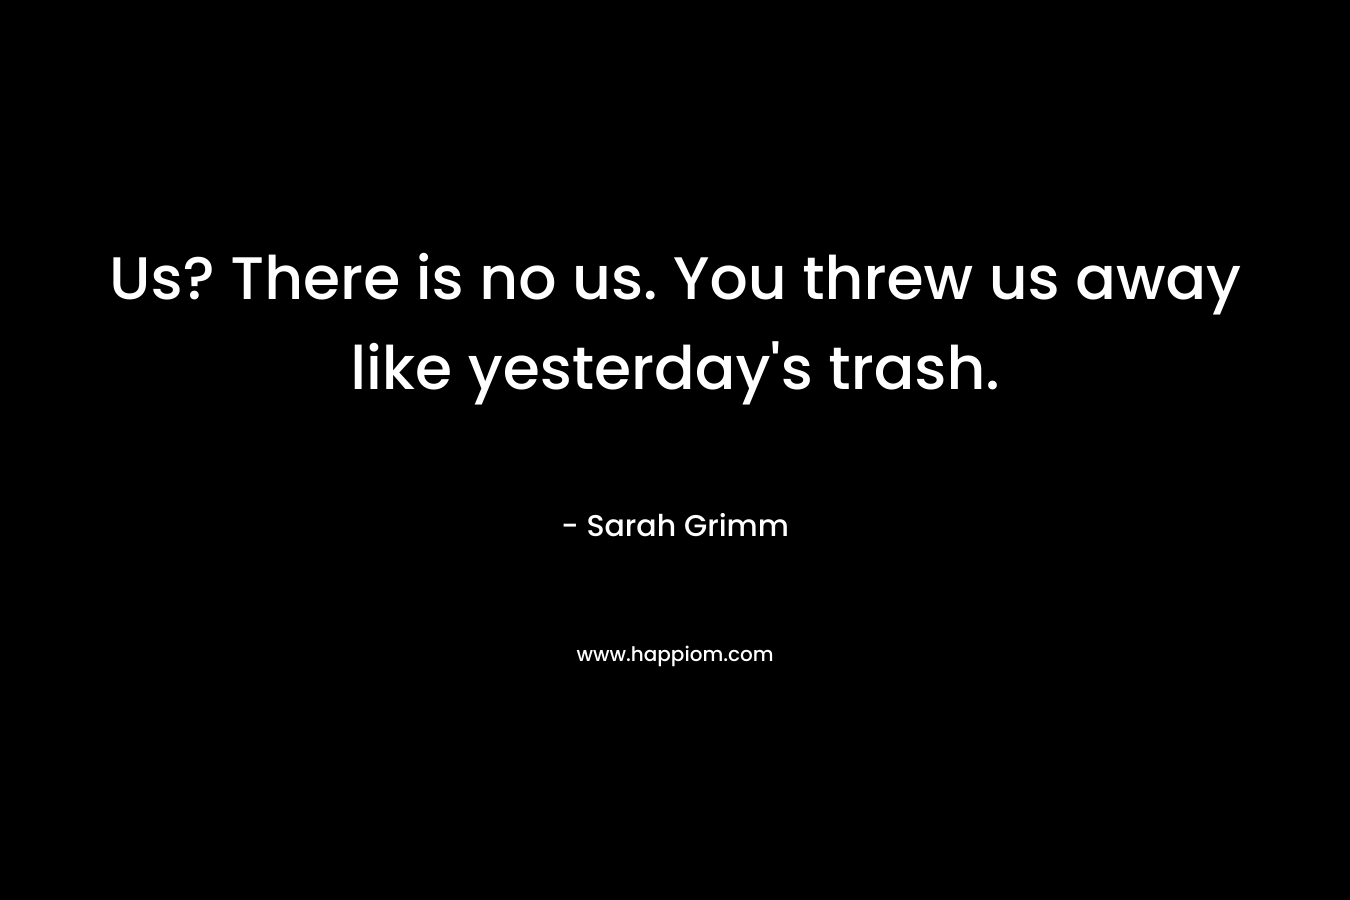 Us? There is no us. You threw us away like yesterday's trash.